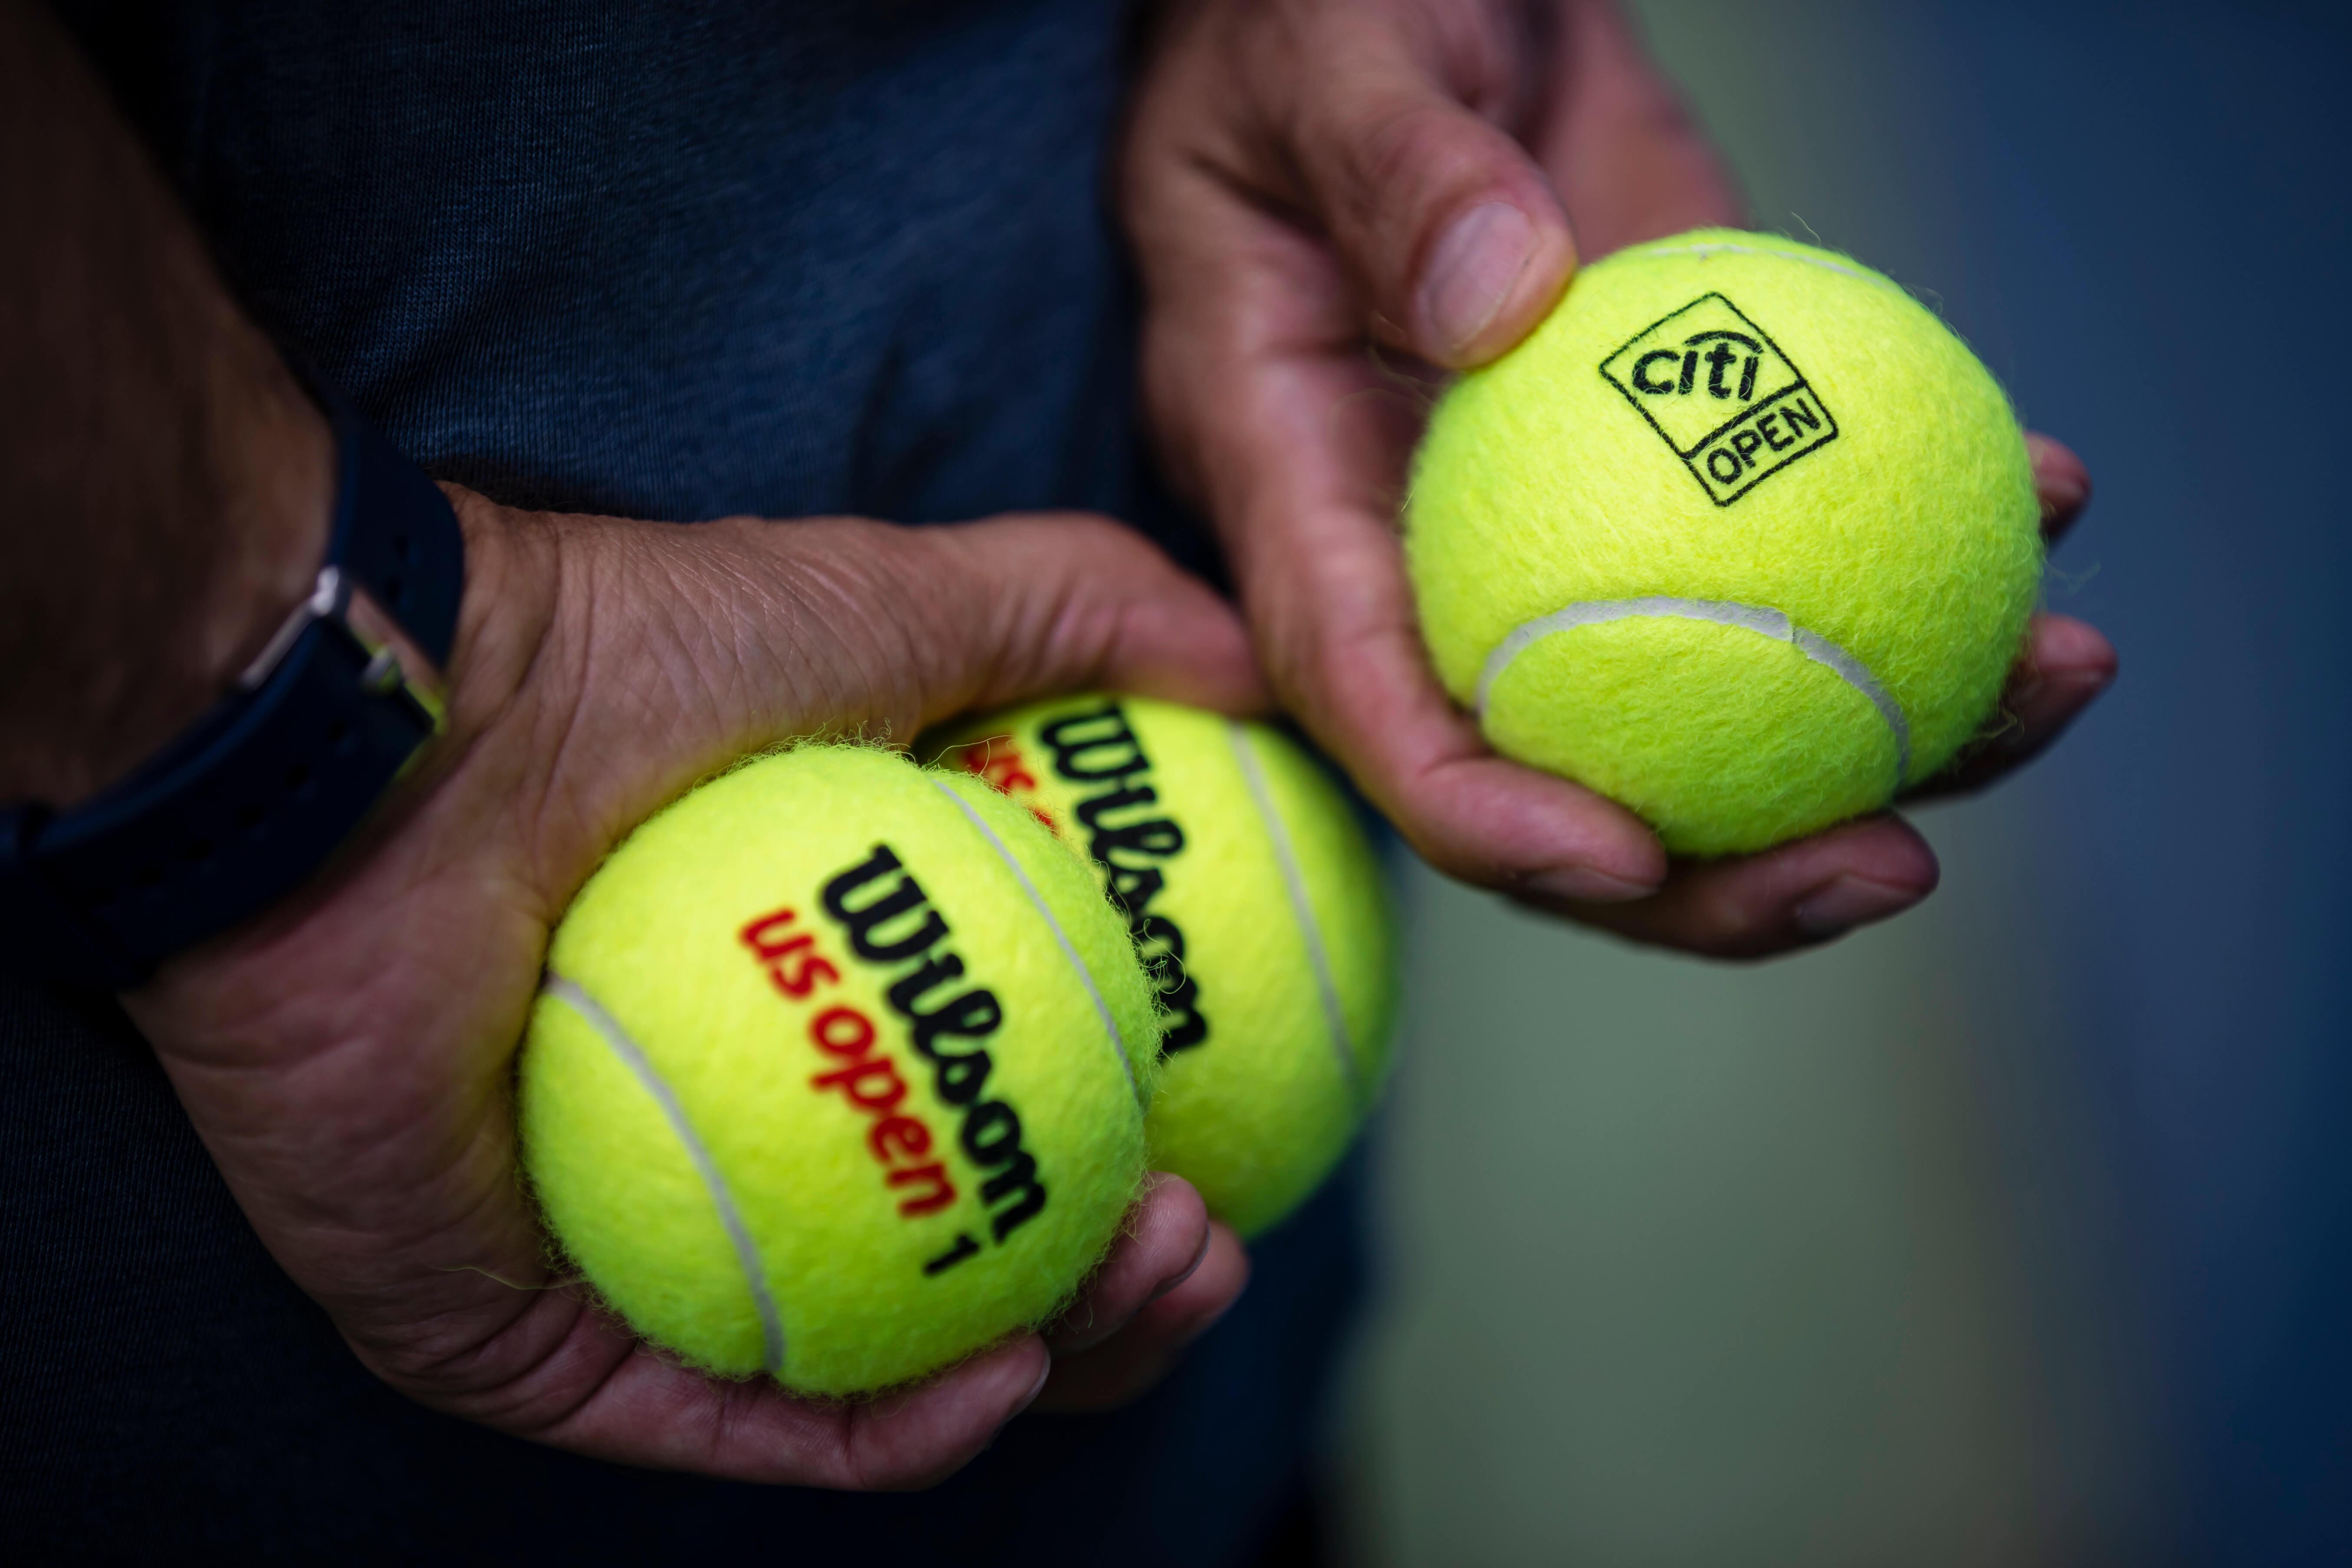 How To Bet - Former Player David Gorsic, Official Admit to Betting on Tennis